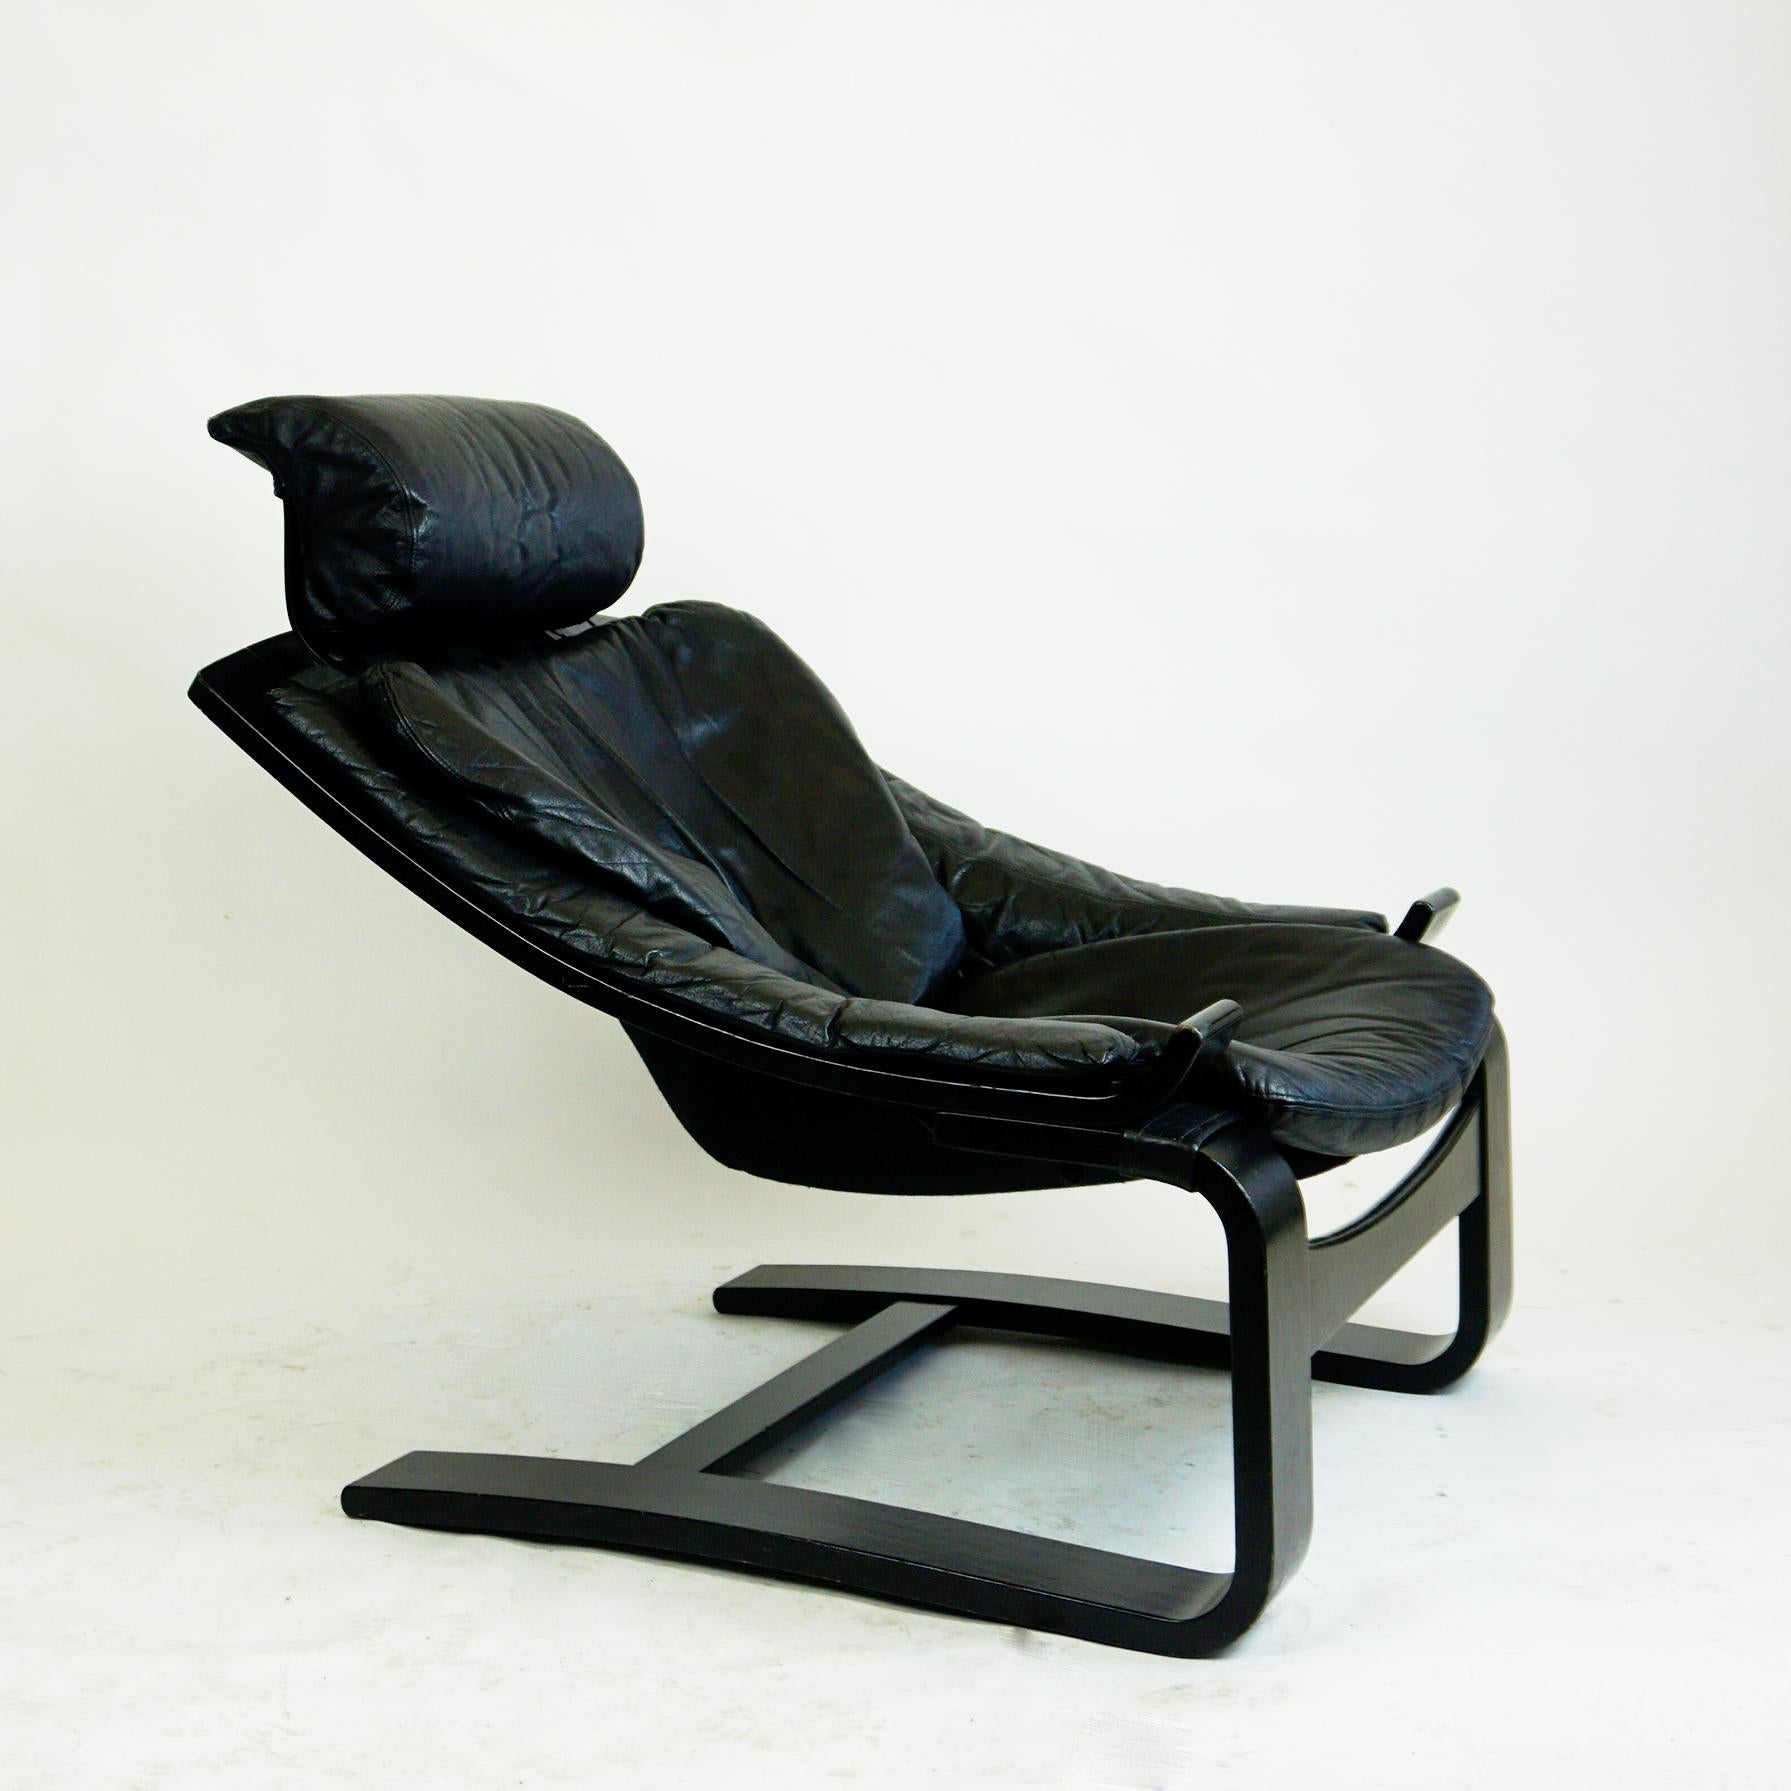 Lacquered Scandinavian Black Leather Kroken Lounge Chair by Ake Fribytter for Nelo Sweden